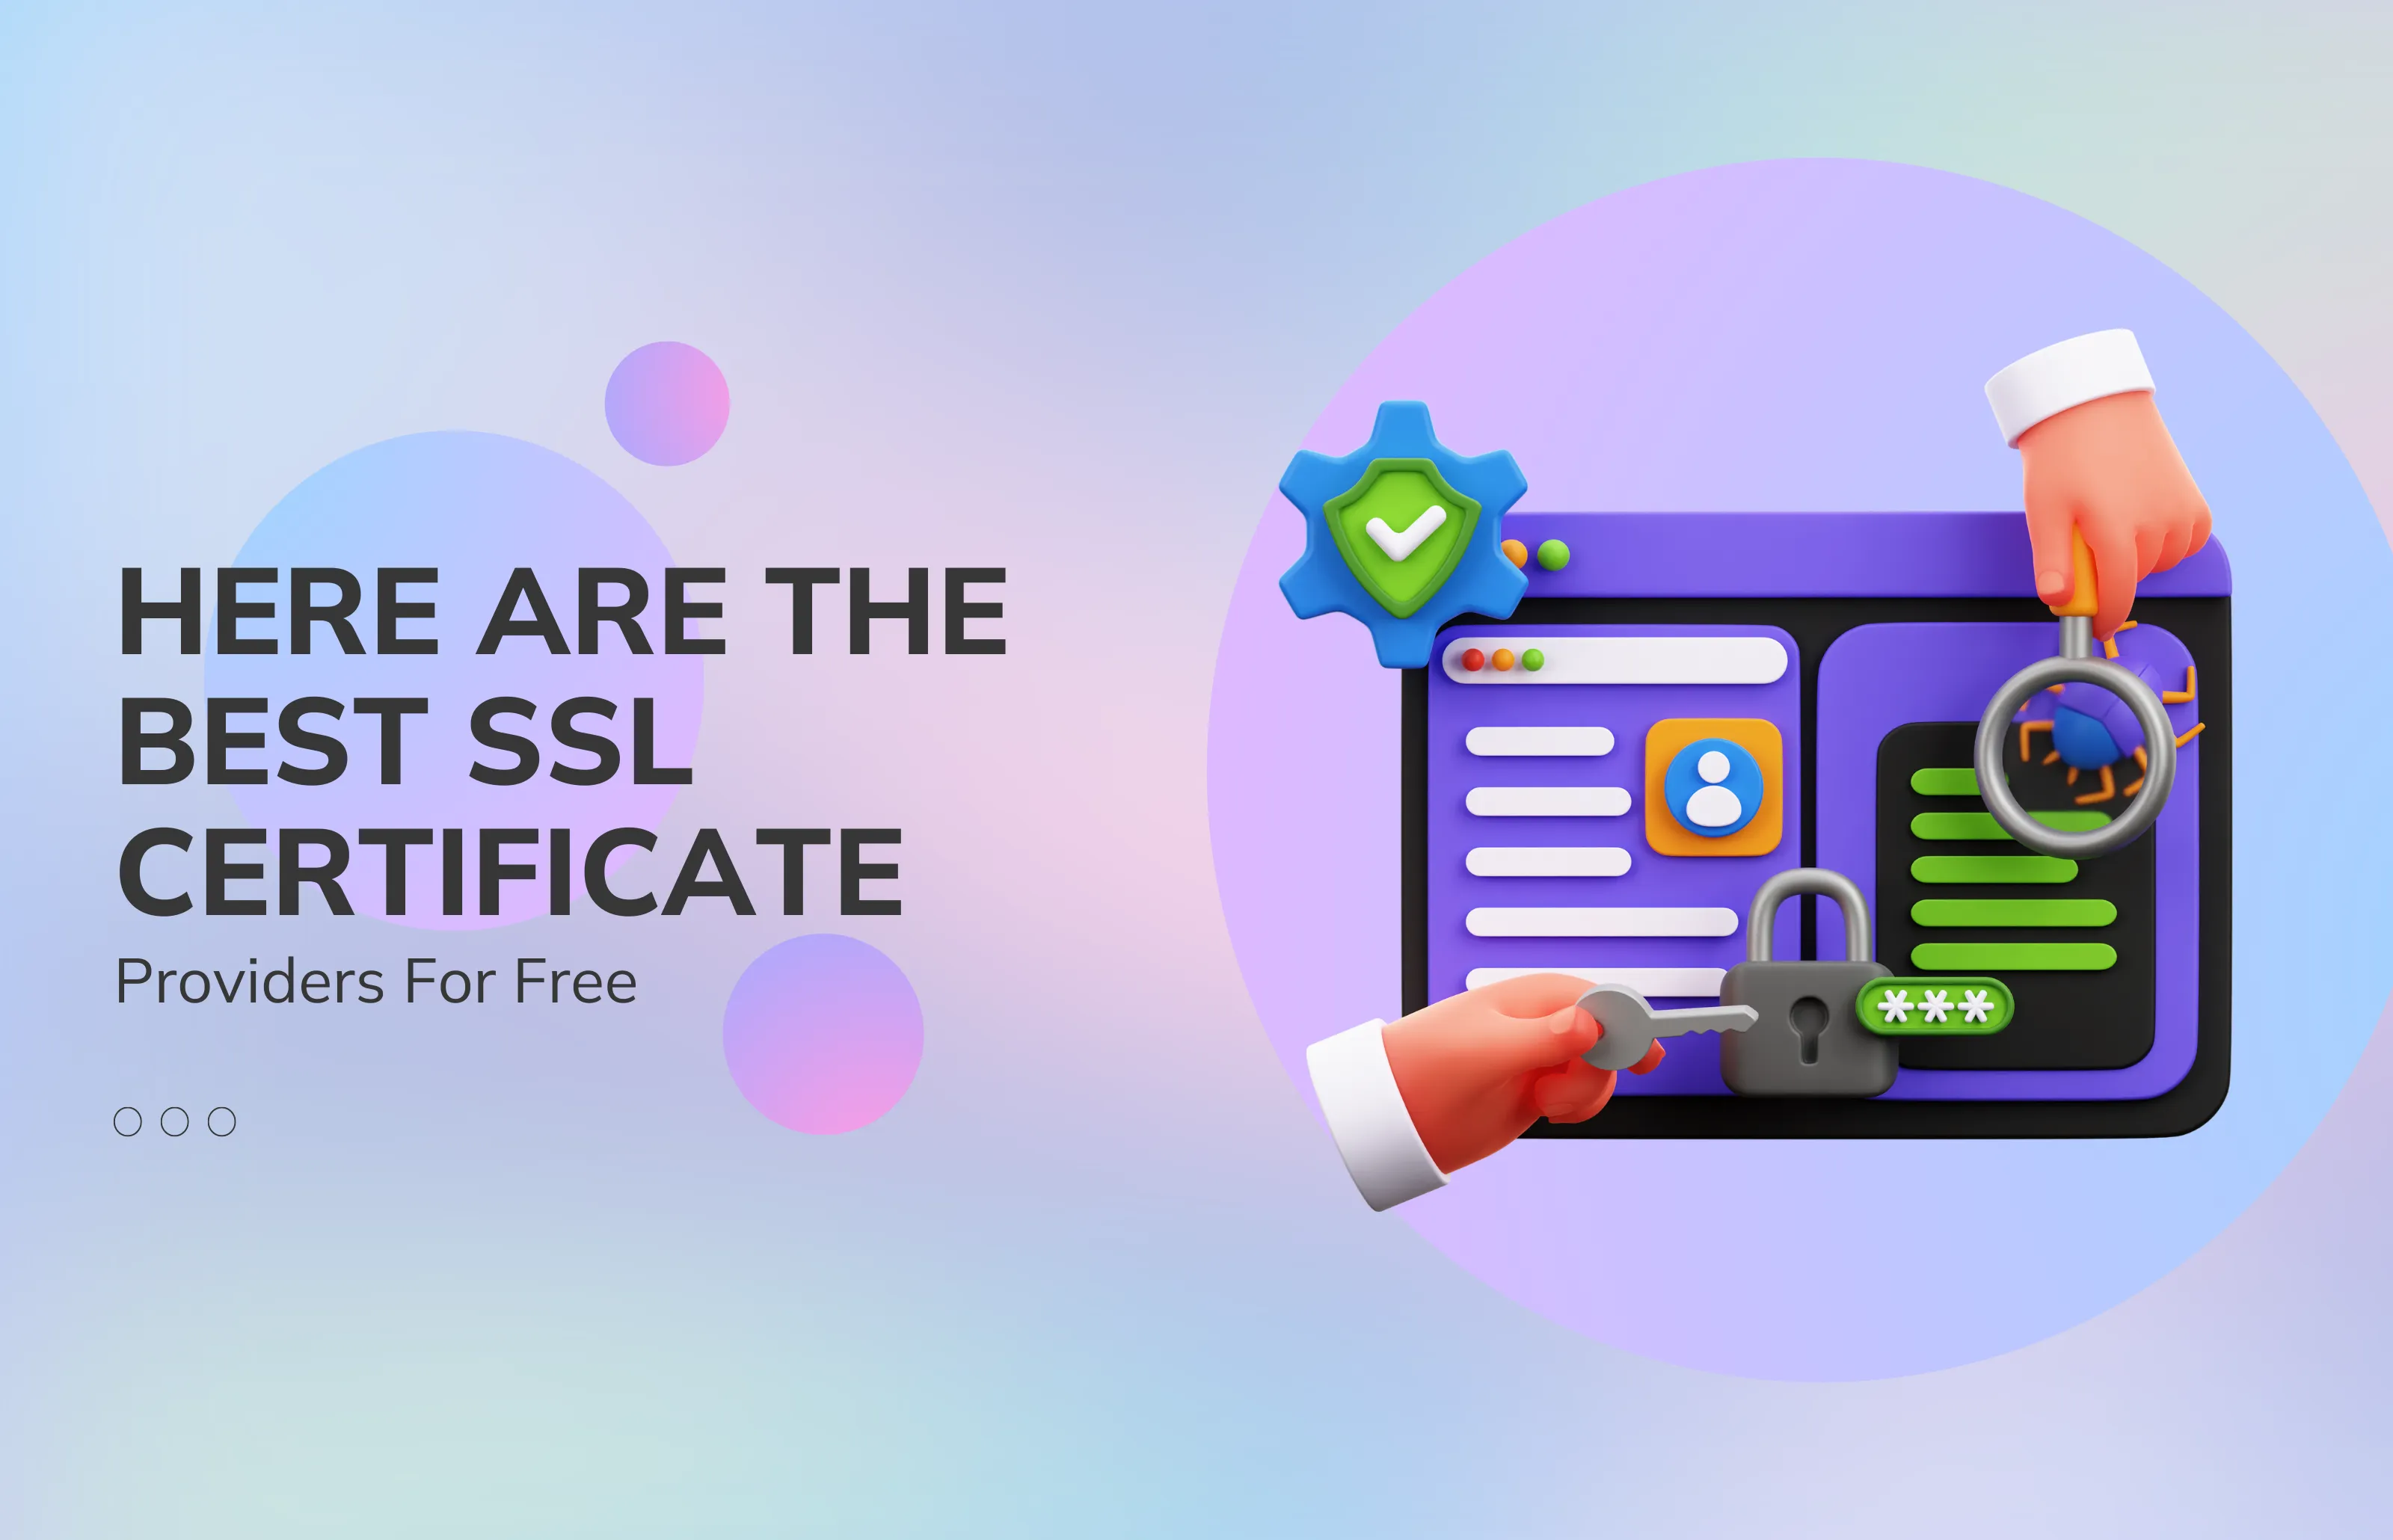 Here are the best SSL certificate providers for free